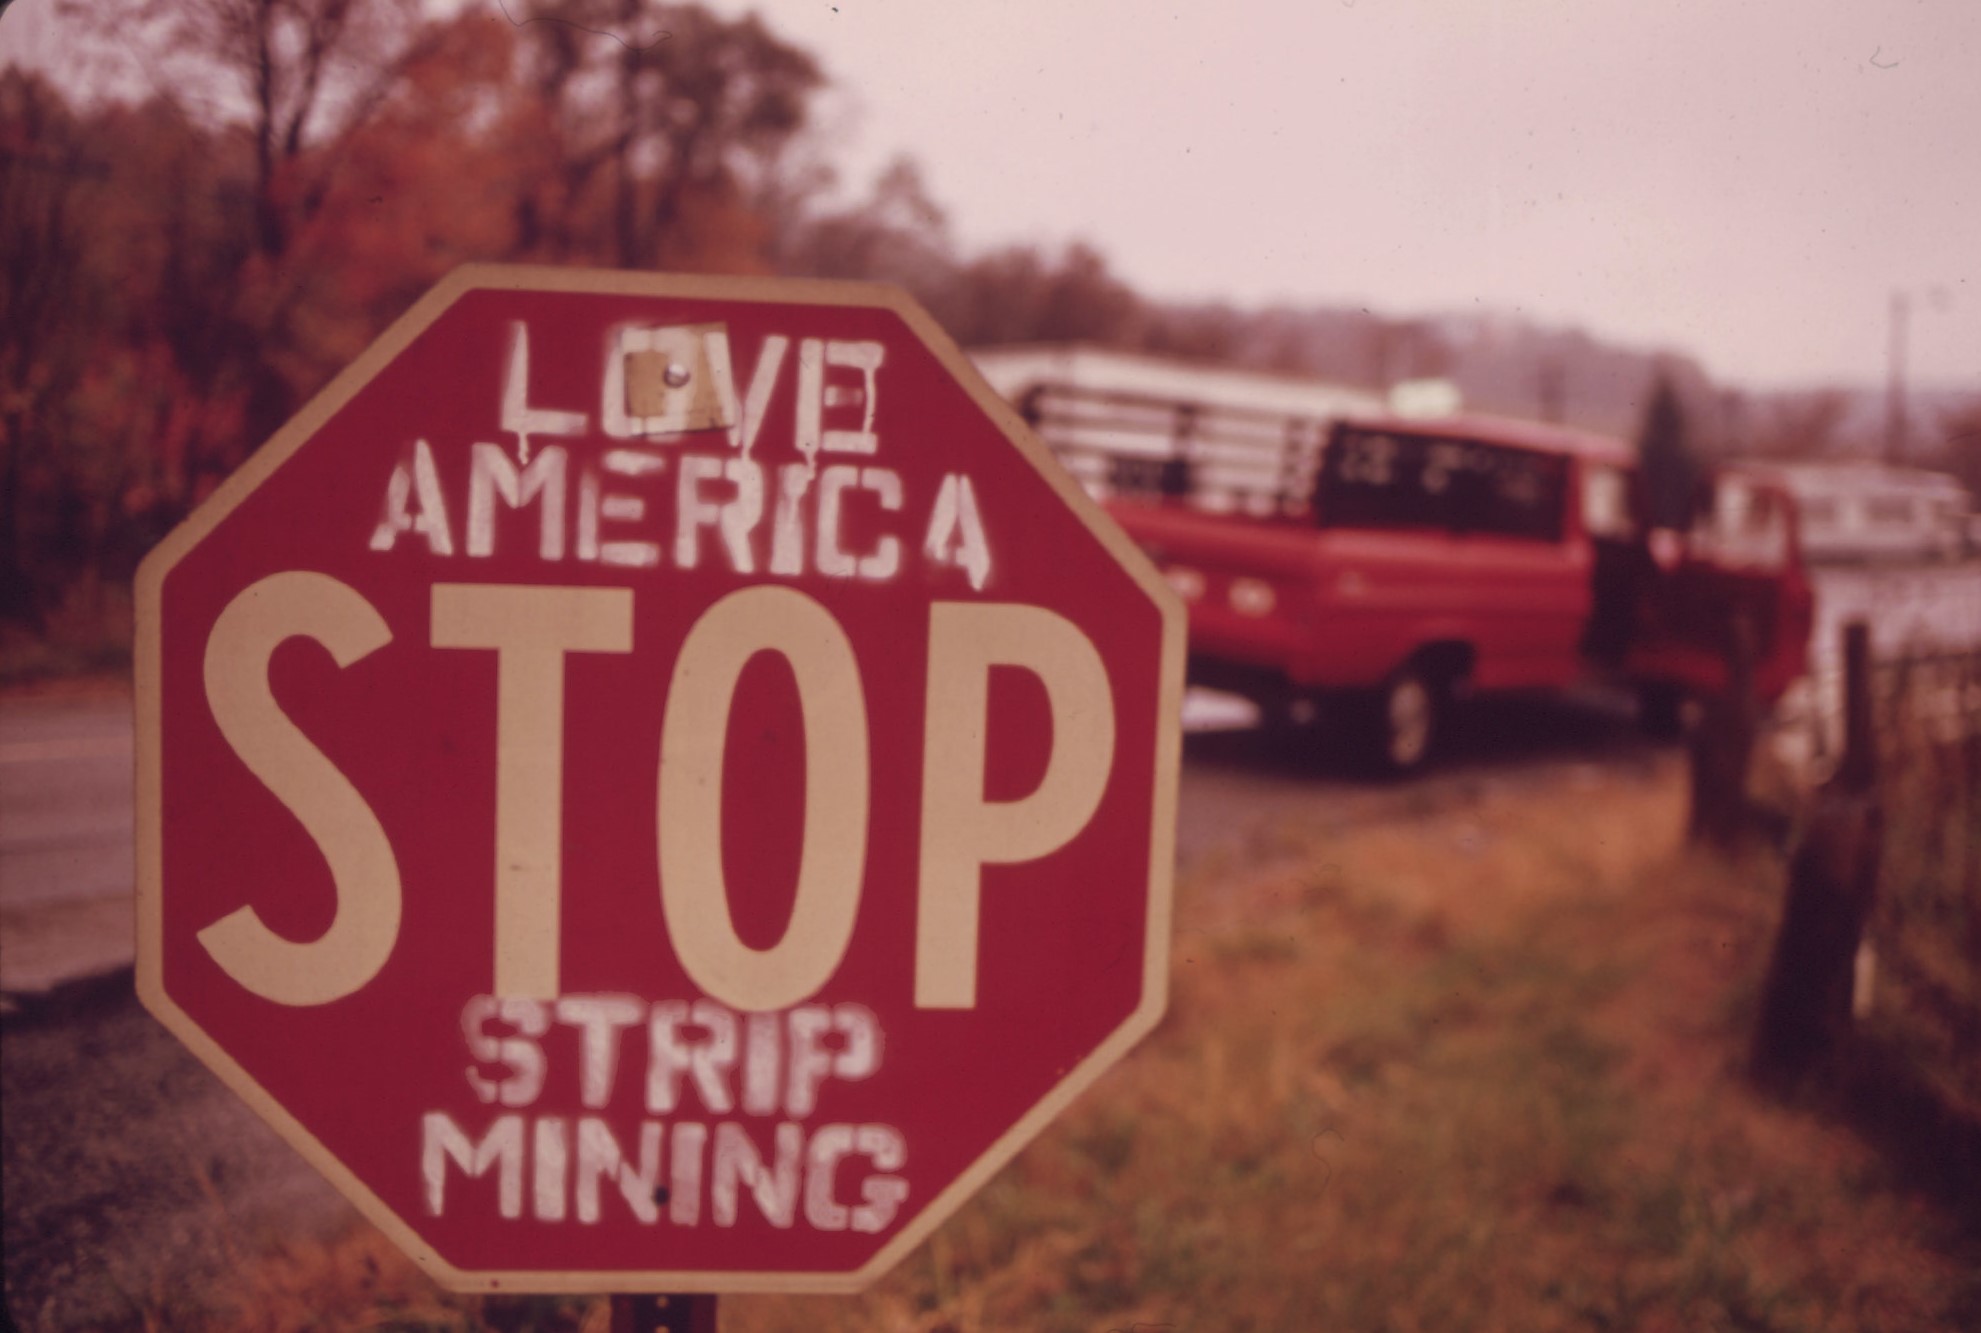 A stop sign in Southeastern Ohio spray-painted in opposition to constant strip mining and depletion of natural resources, 1973.